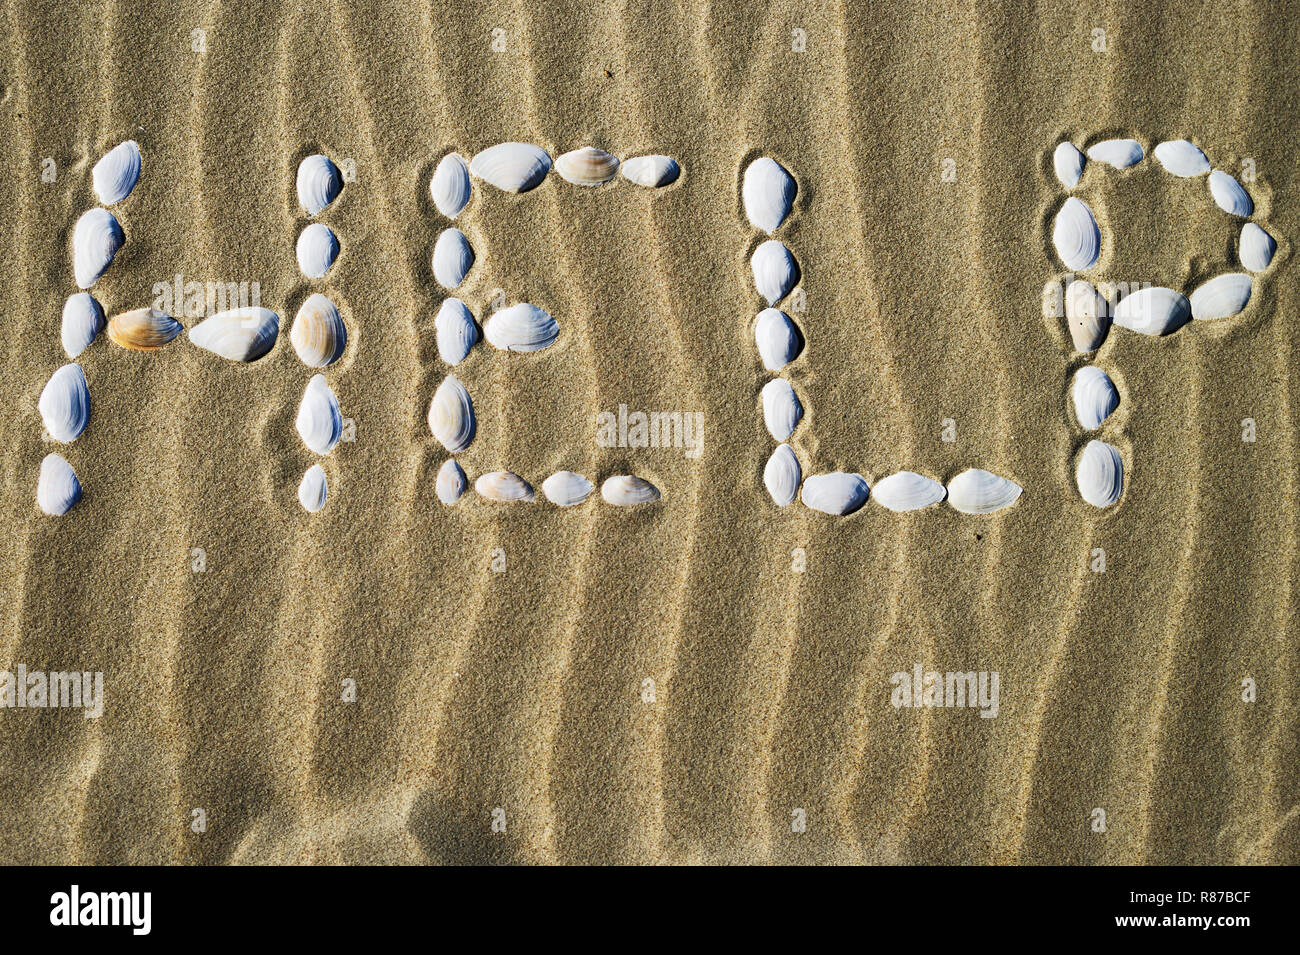 The word Help made of white seashells on sand. Calling for help in danger. Stock Photo